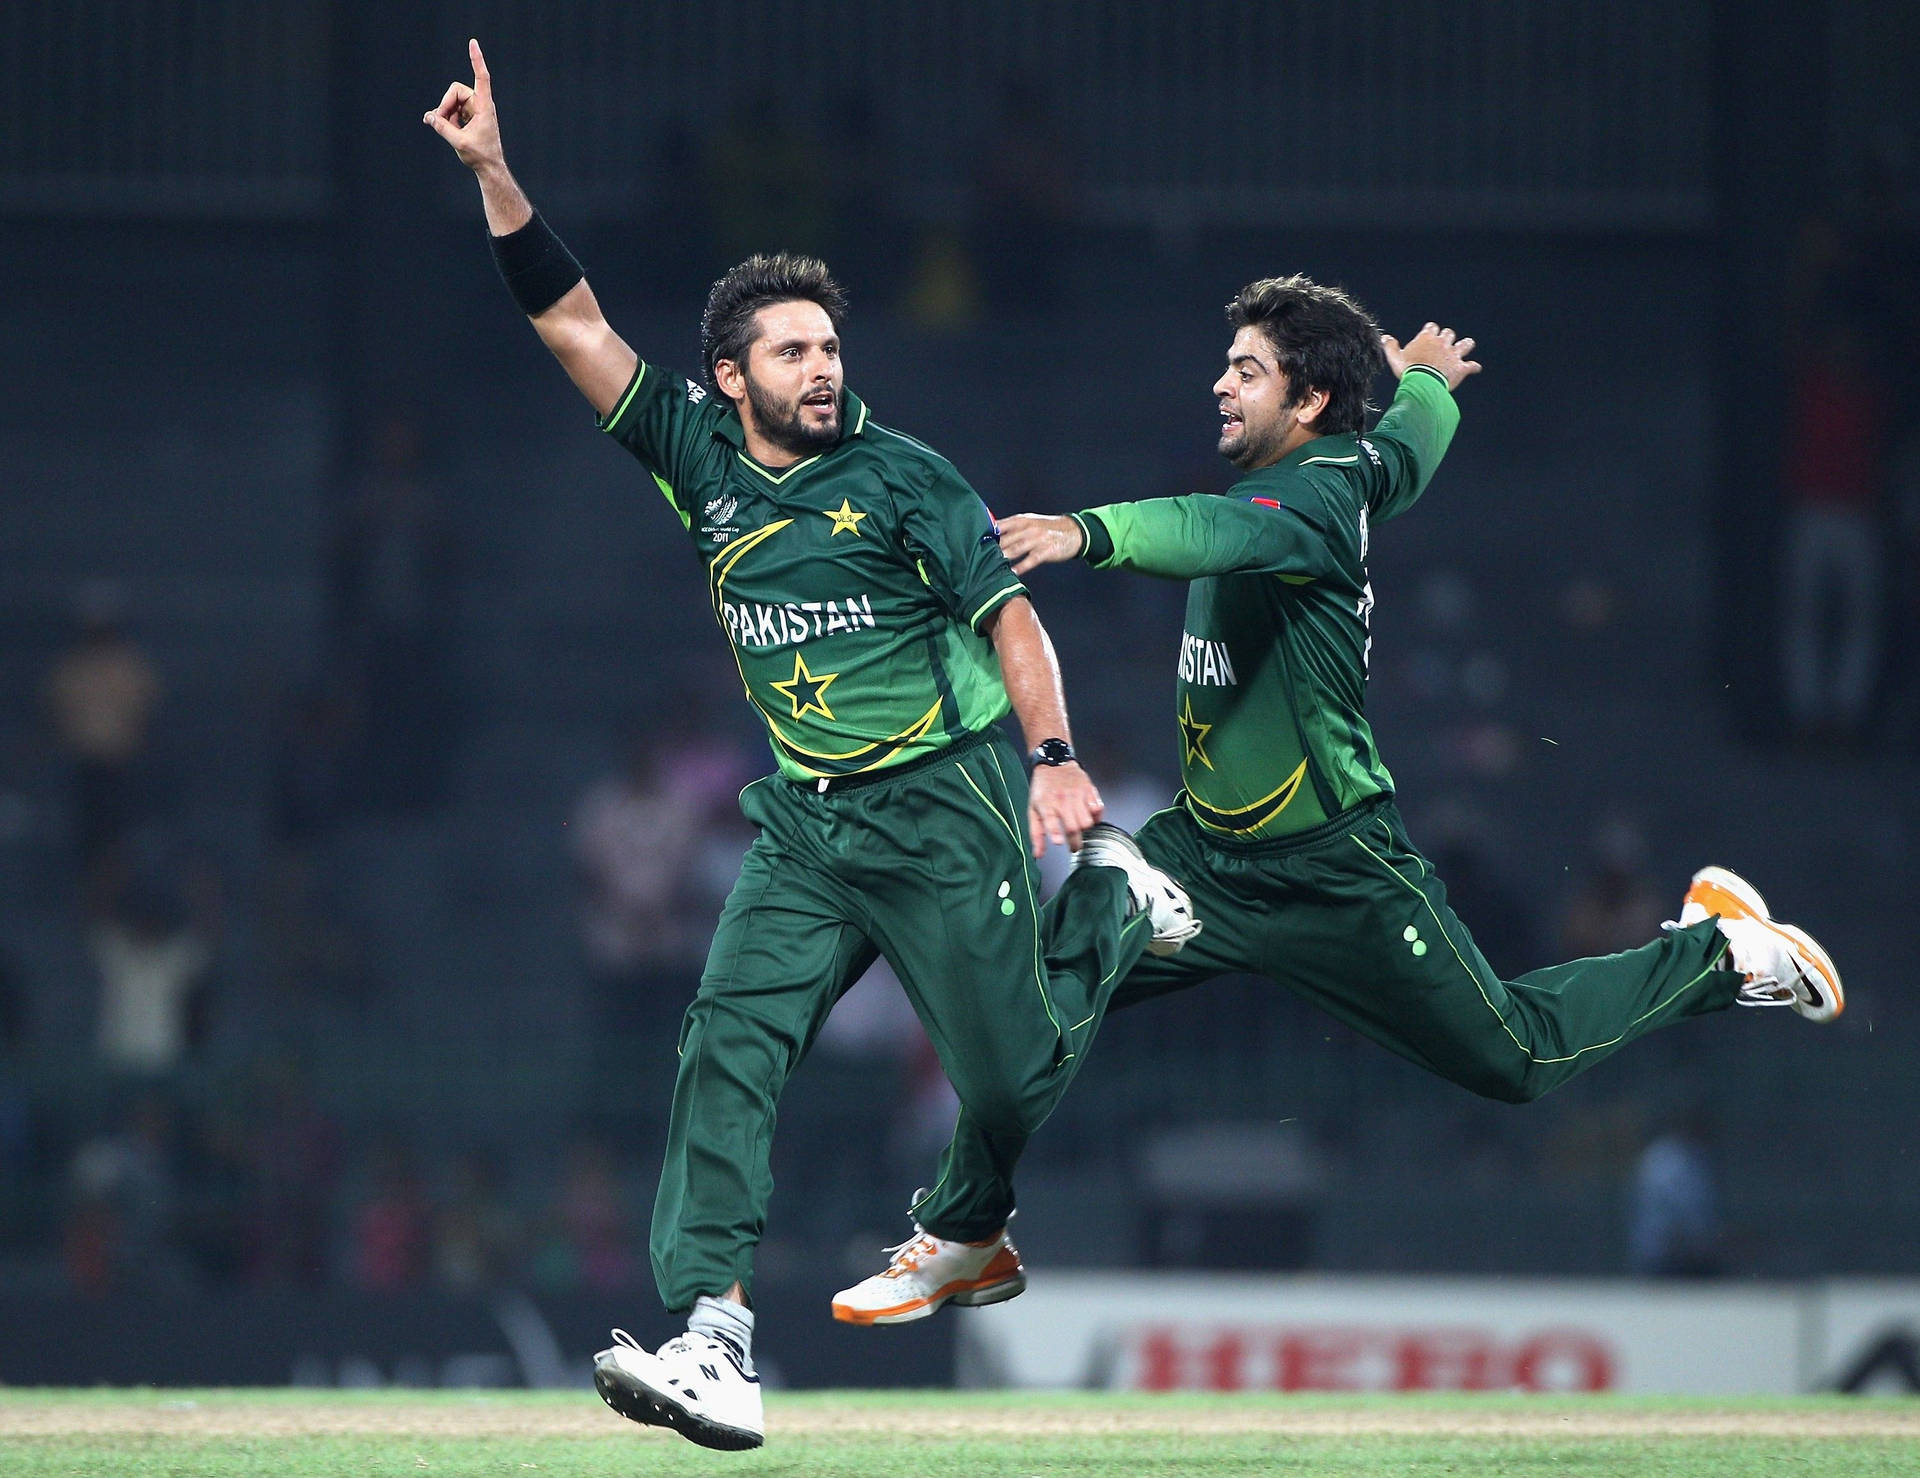 Pakistancricket Afridi Och Shahzad (could Be A Suitable Wallpaper Title) Wallpaper